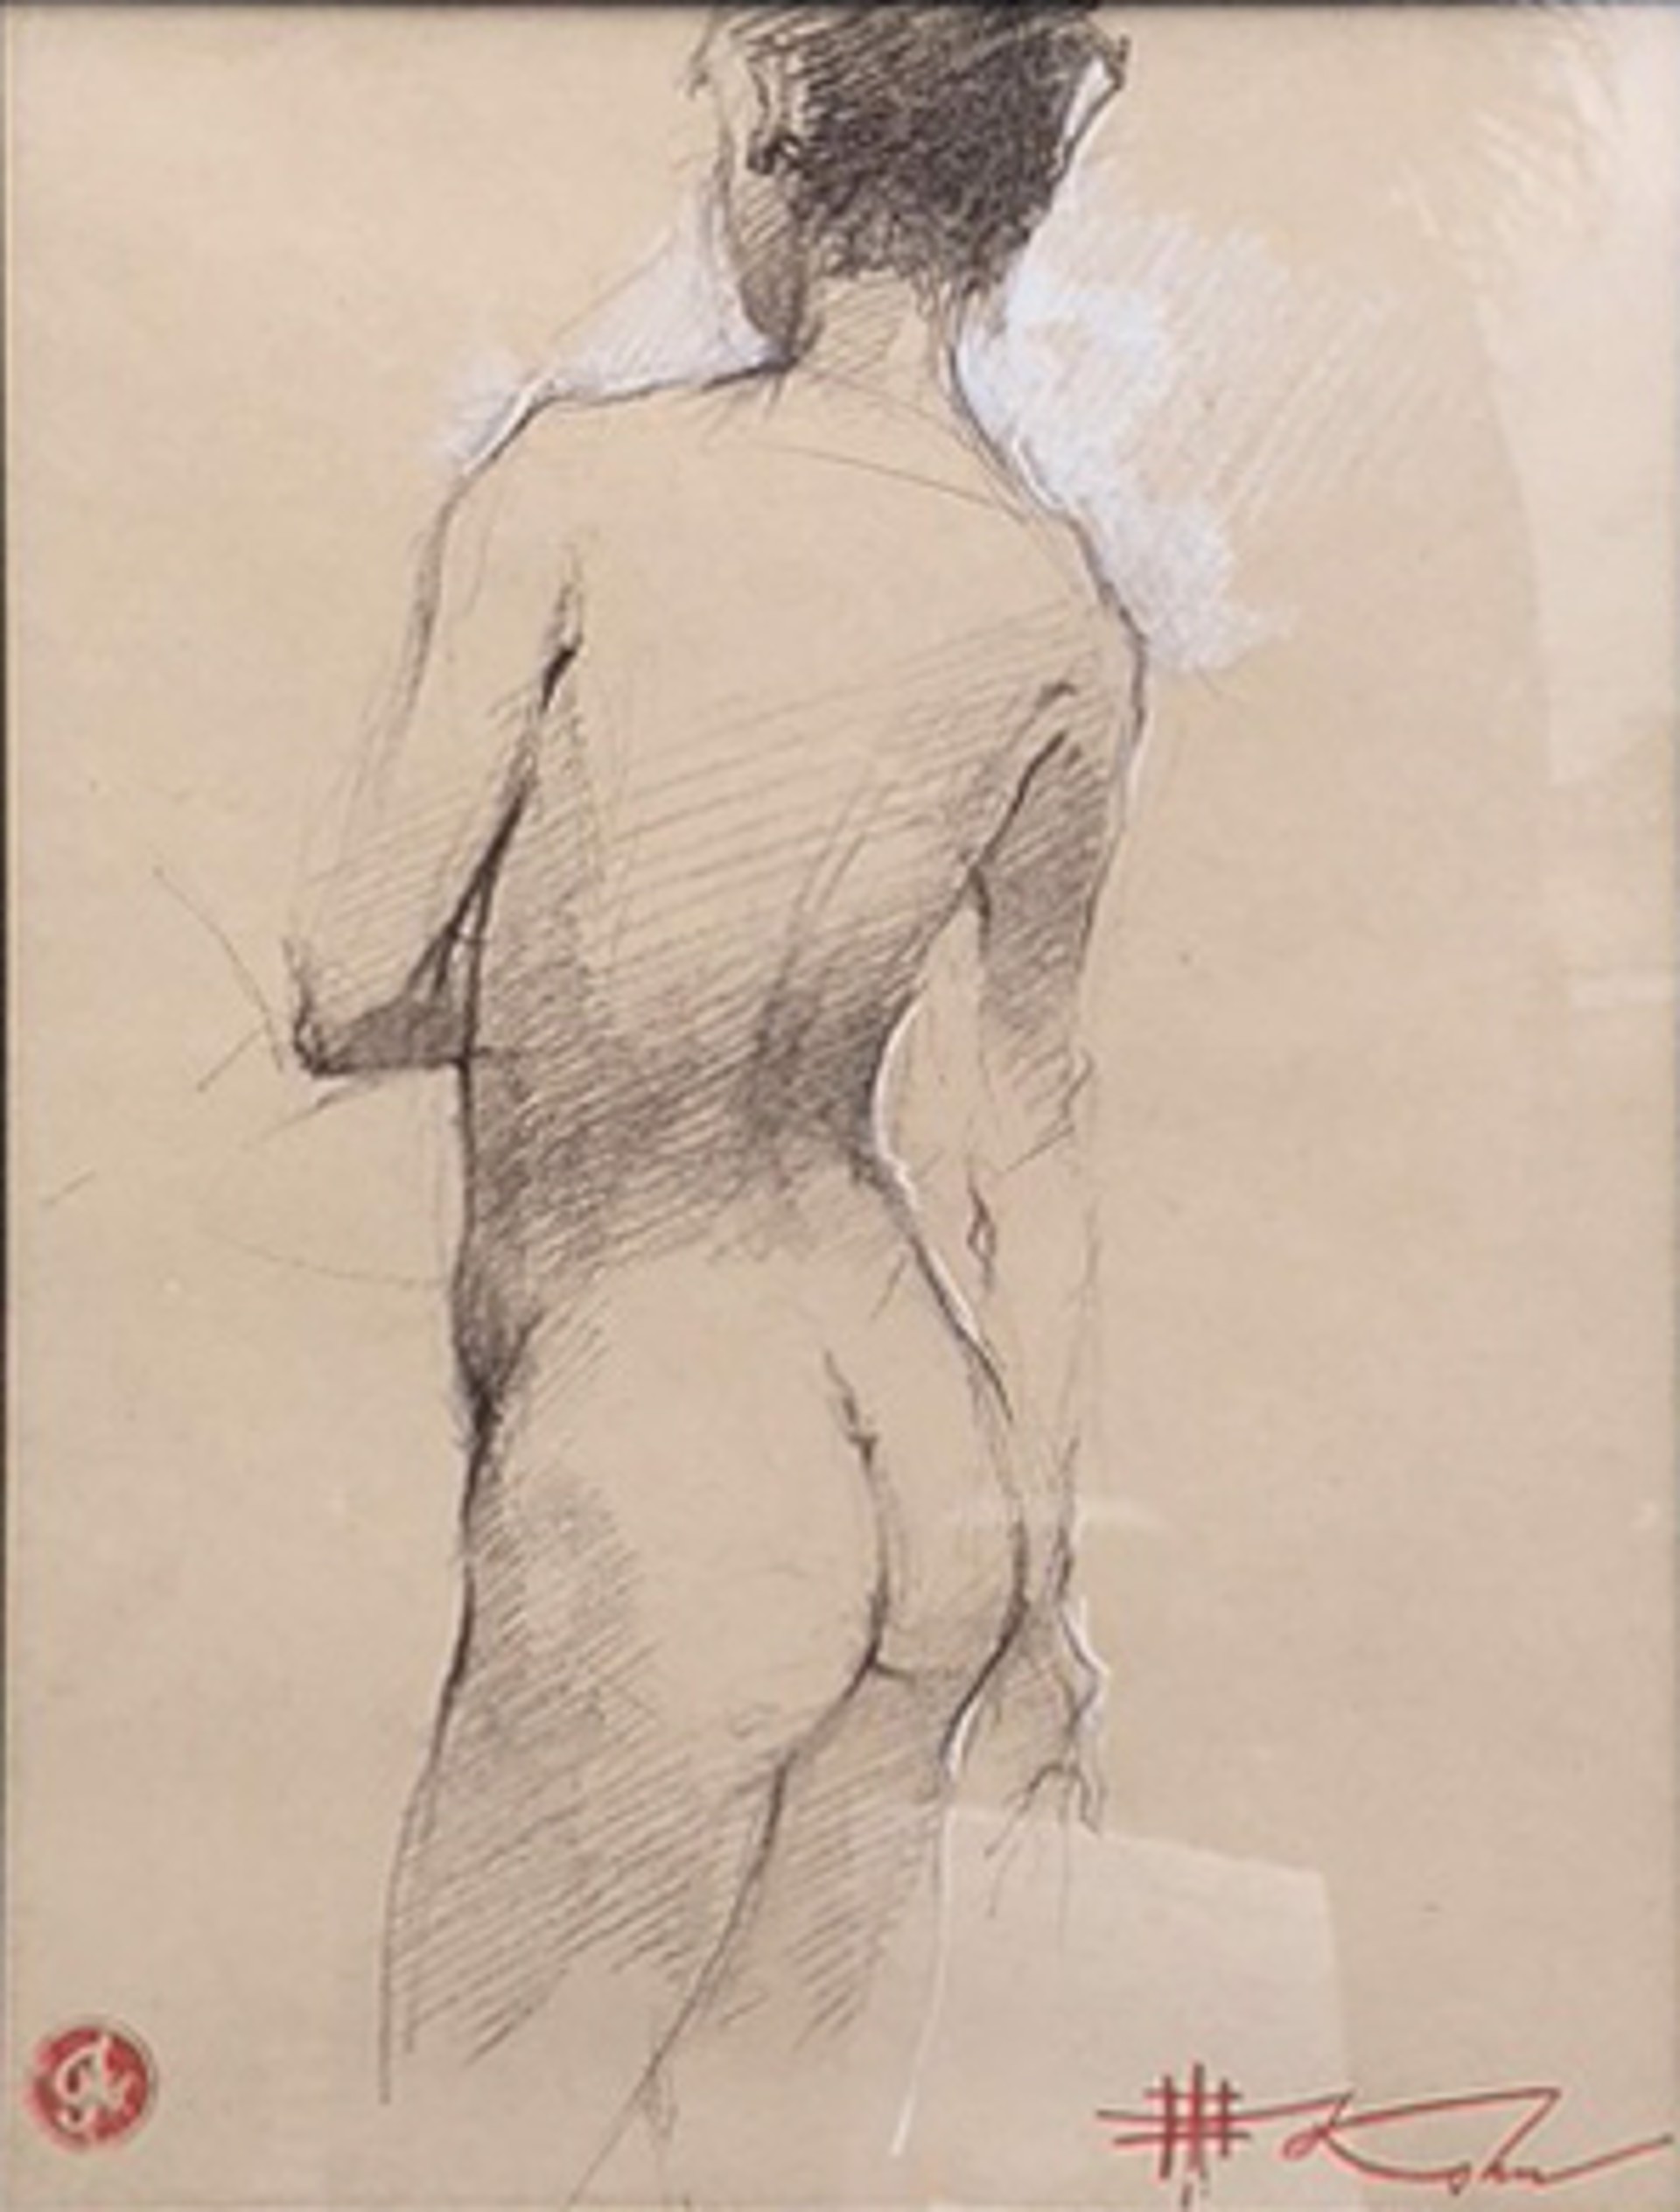 "Nude Study" by Andre Kohn